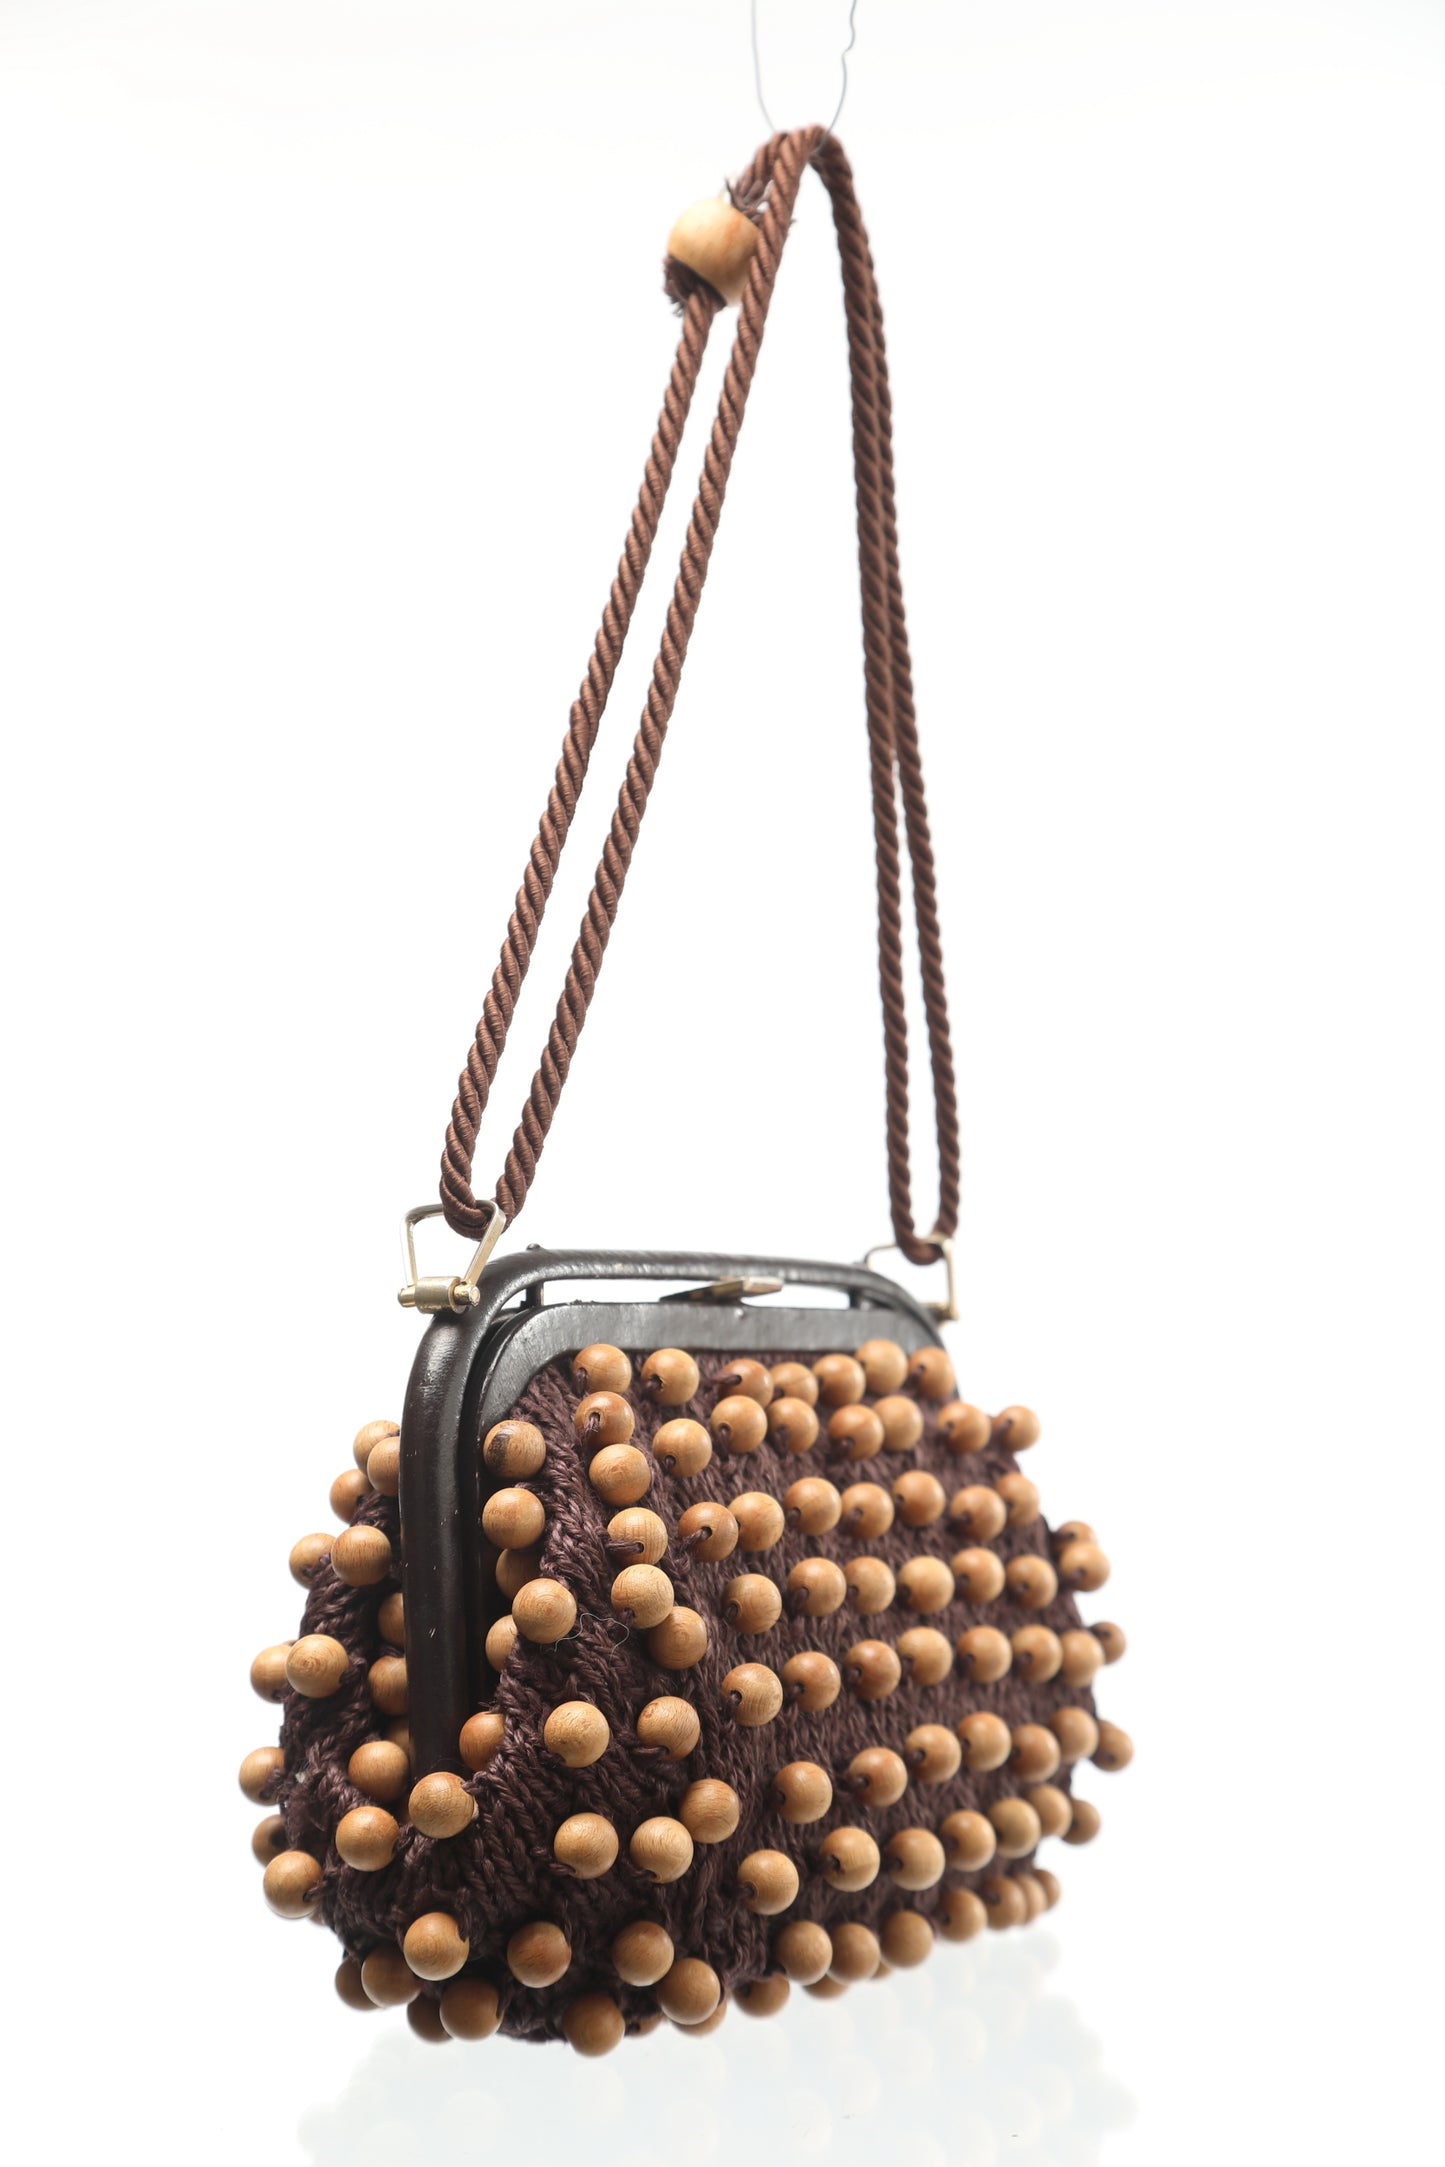 70s bag with wooden beads